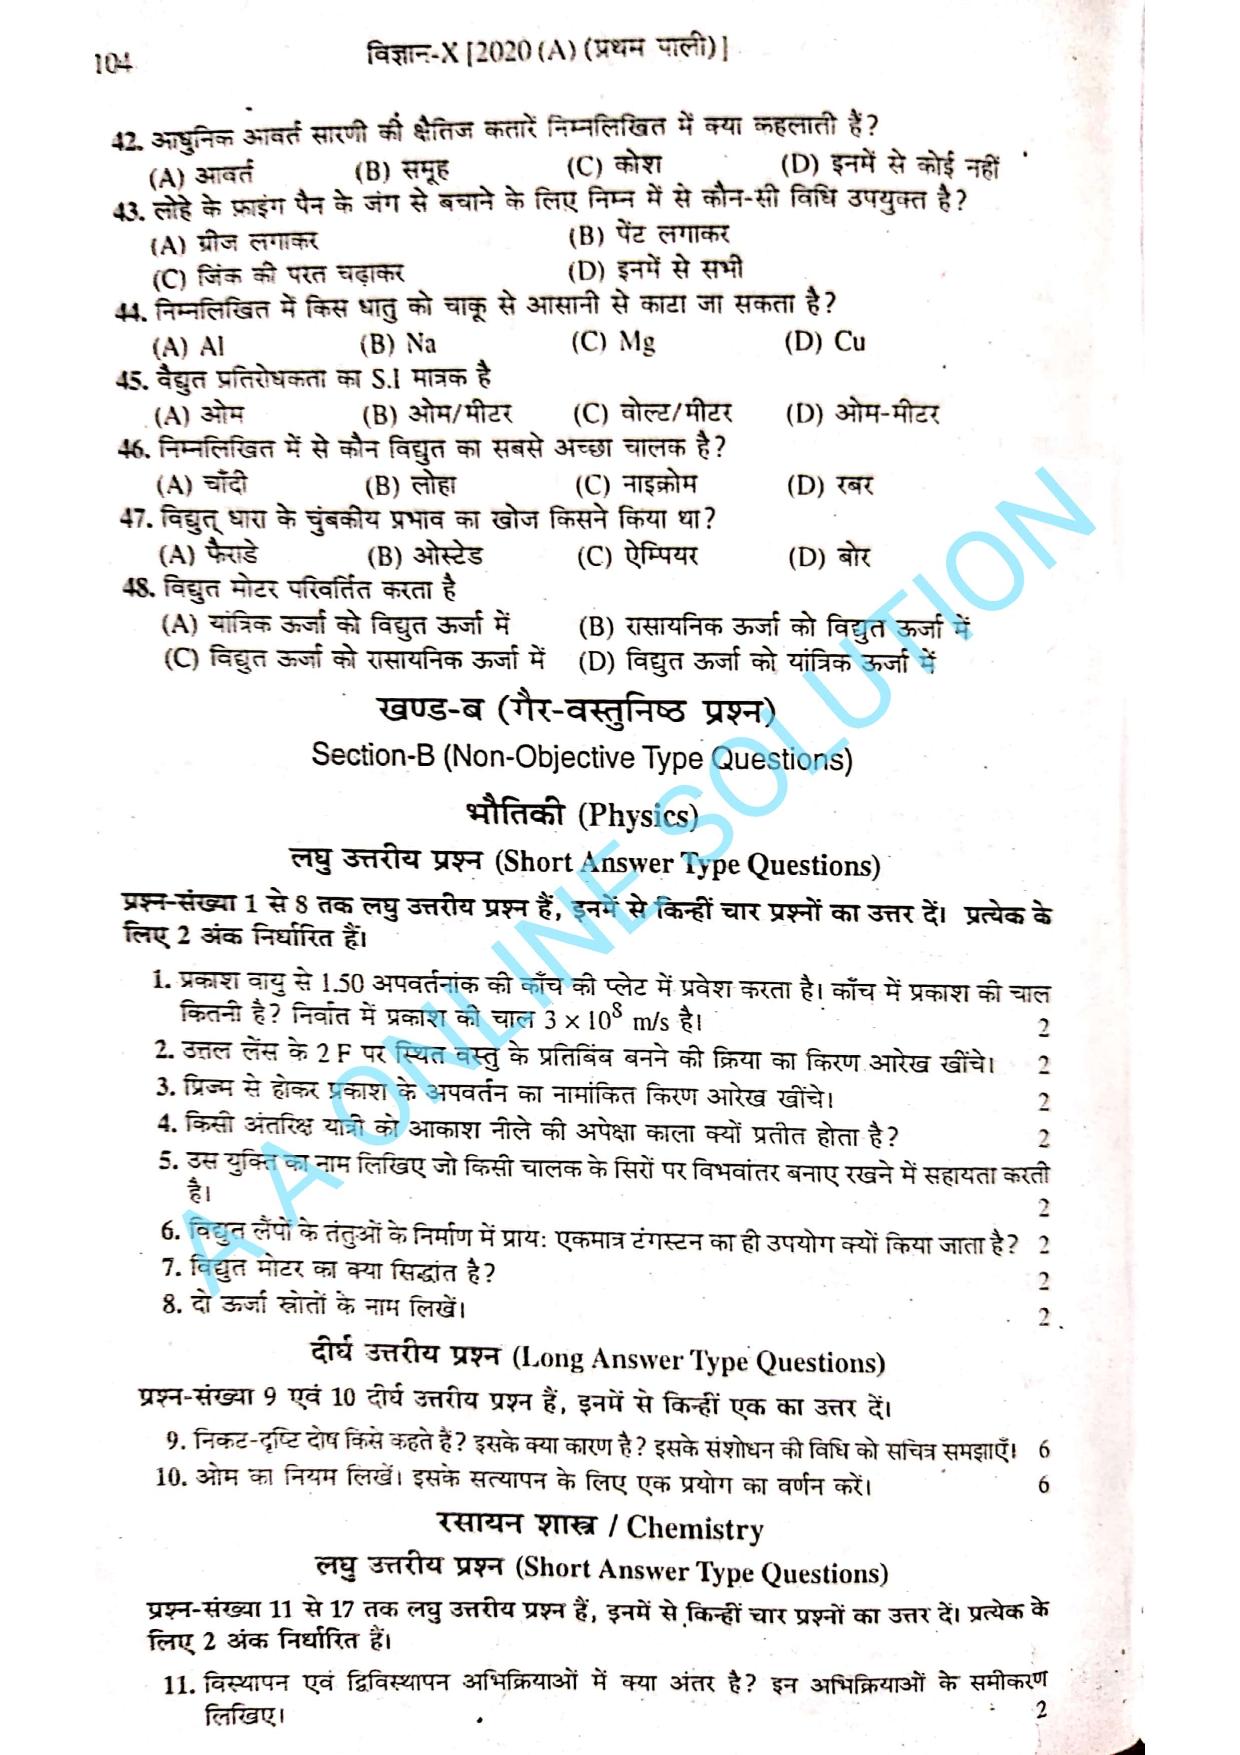 Bihar Board Class 10 Science 2020 (1st Sitting) Question Paper - Page 4